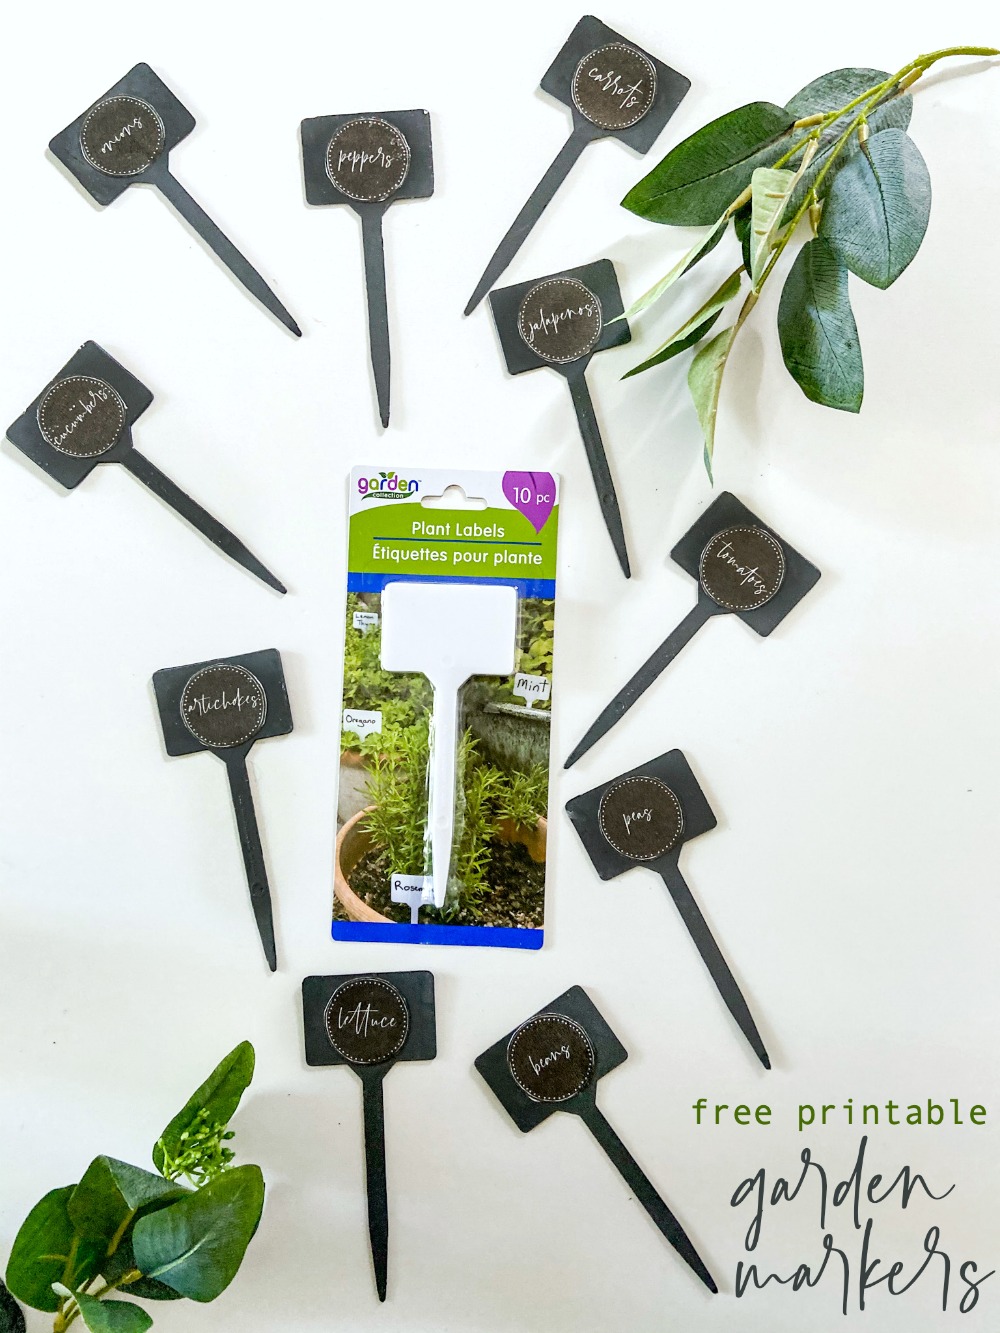 Printable Garden Plant Markers. Keep track of the plants in your garden with these DIY Garden Plant Markers with free printables that are the perfect size for Dollar Store stakes. 